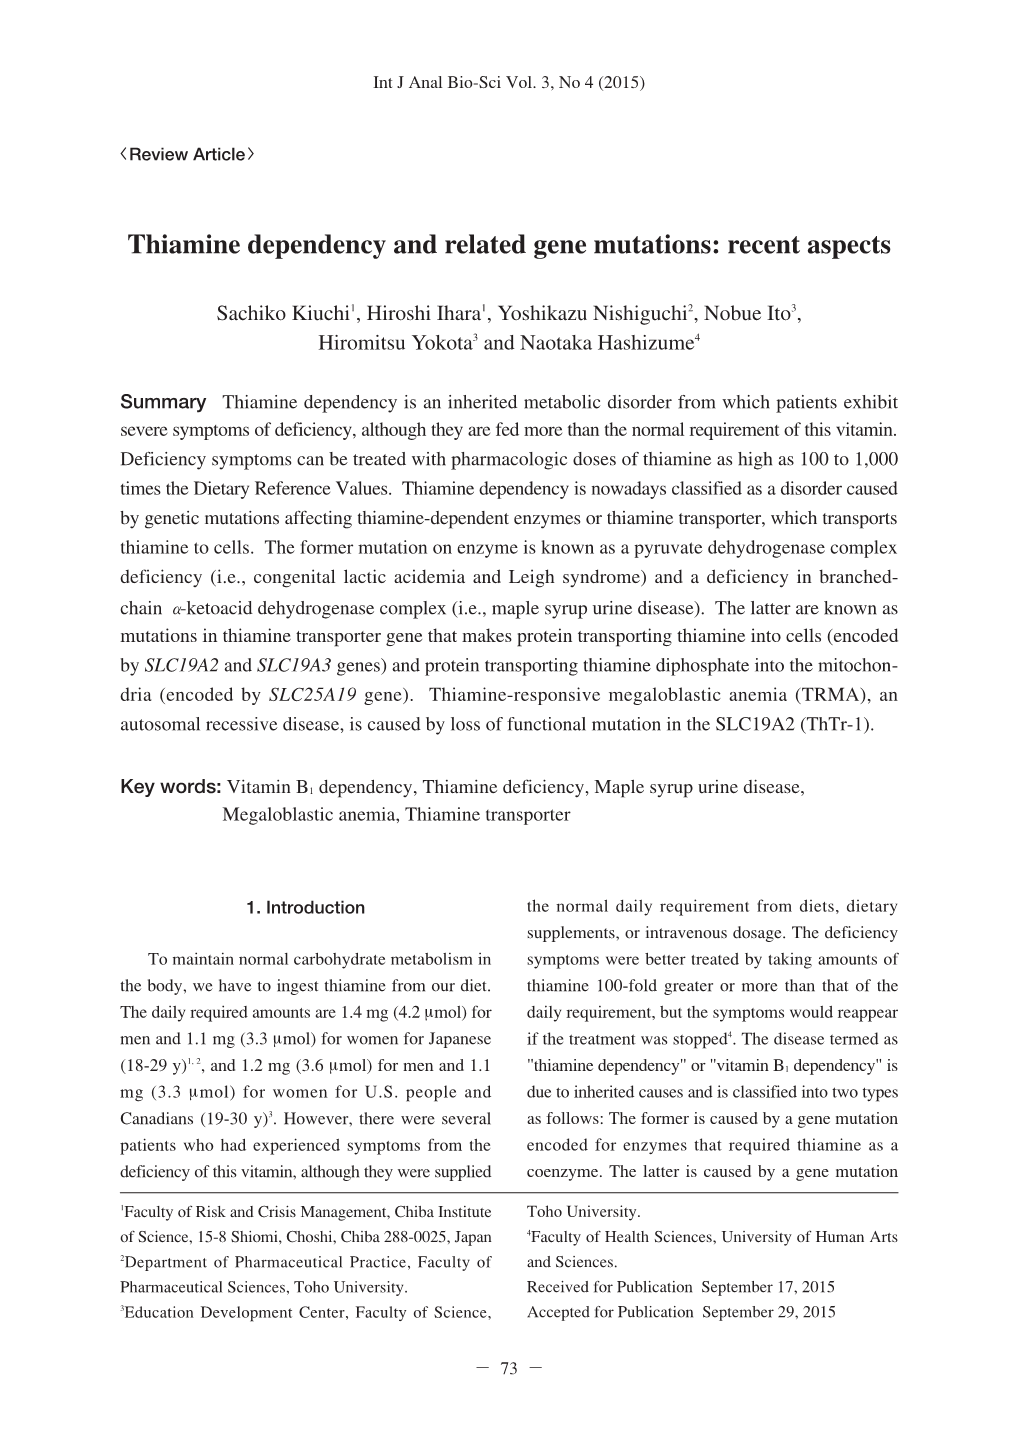 Thiamine Dependency and Related Gene Mutations: Recent Aspects